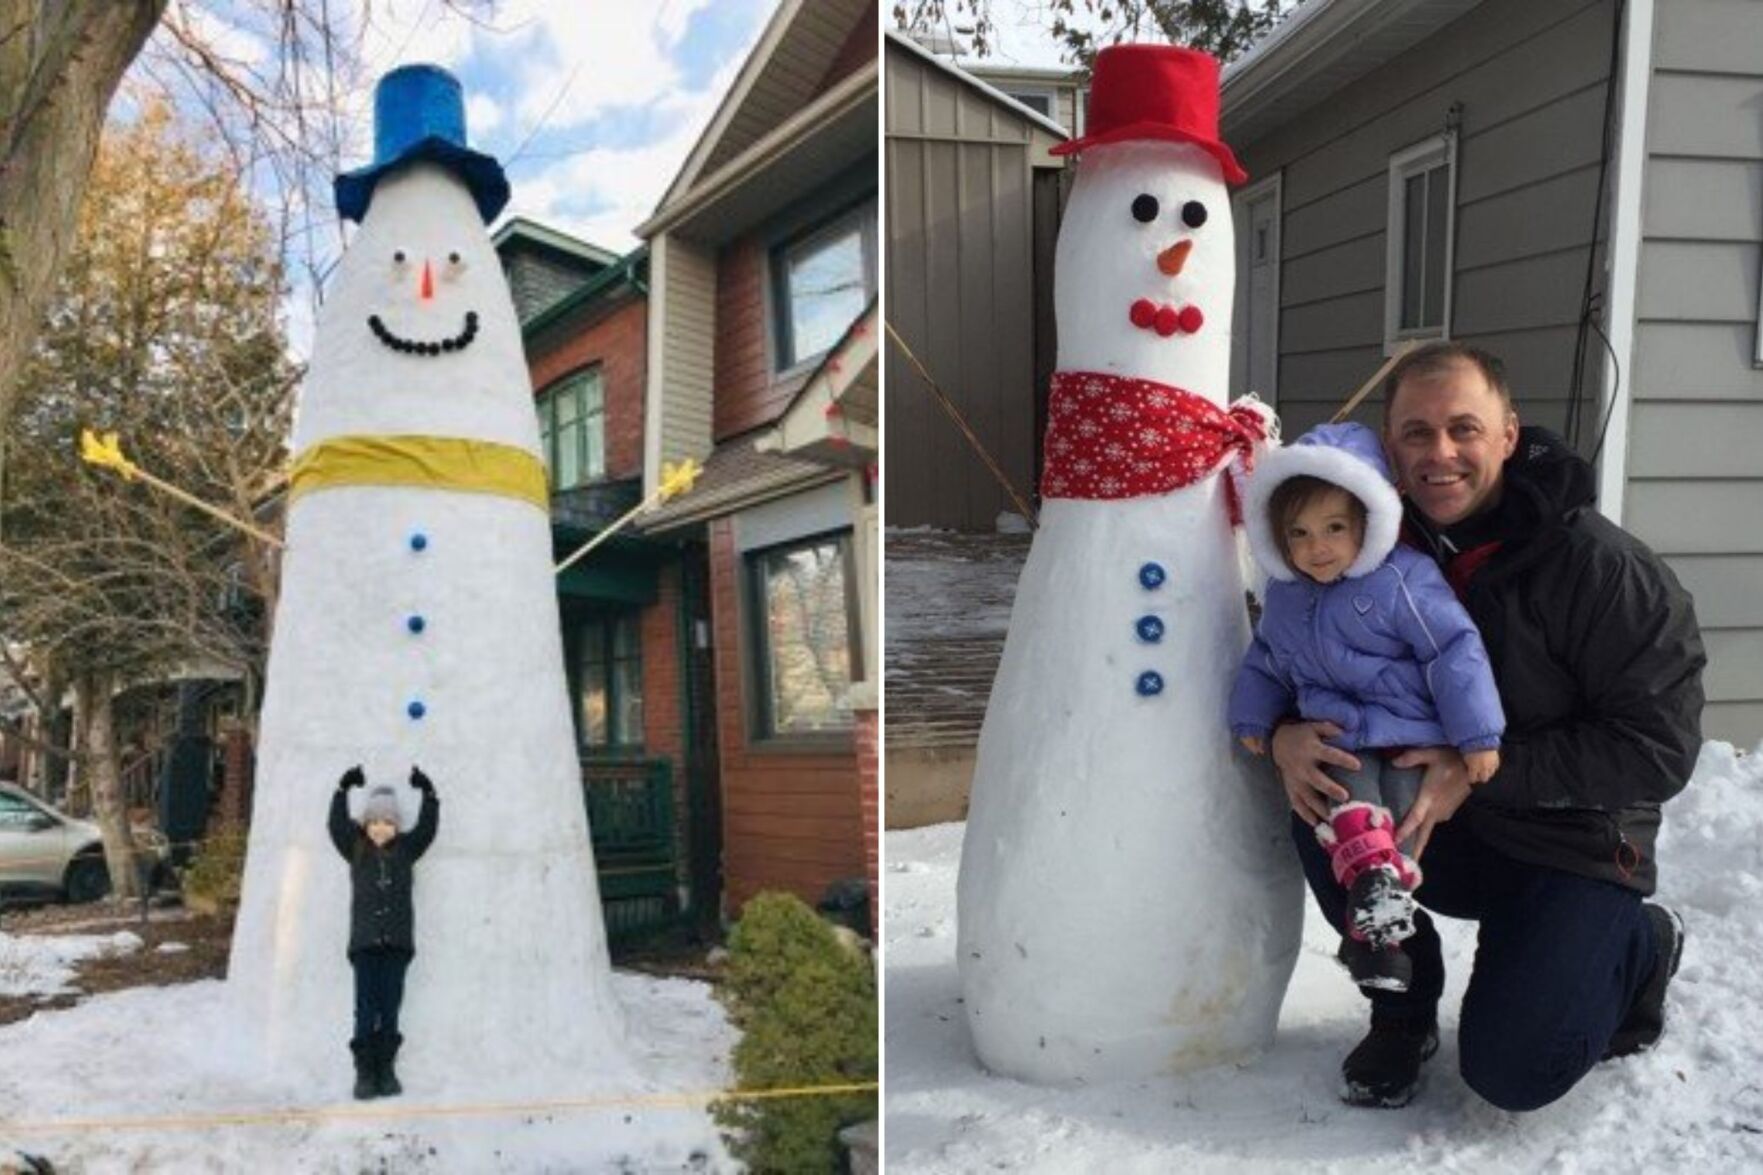 Is the snowman melting away in Toronto? We asked experts